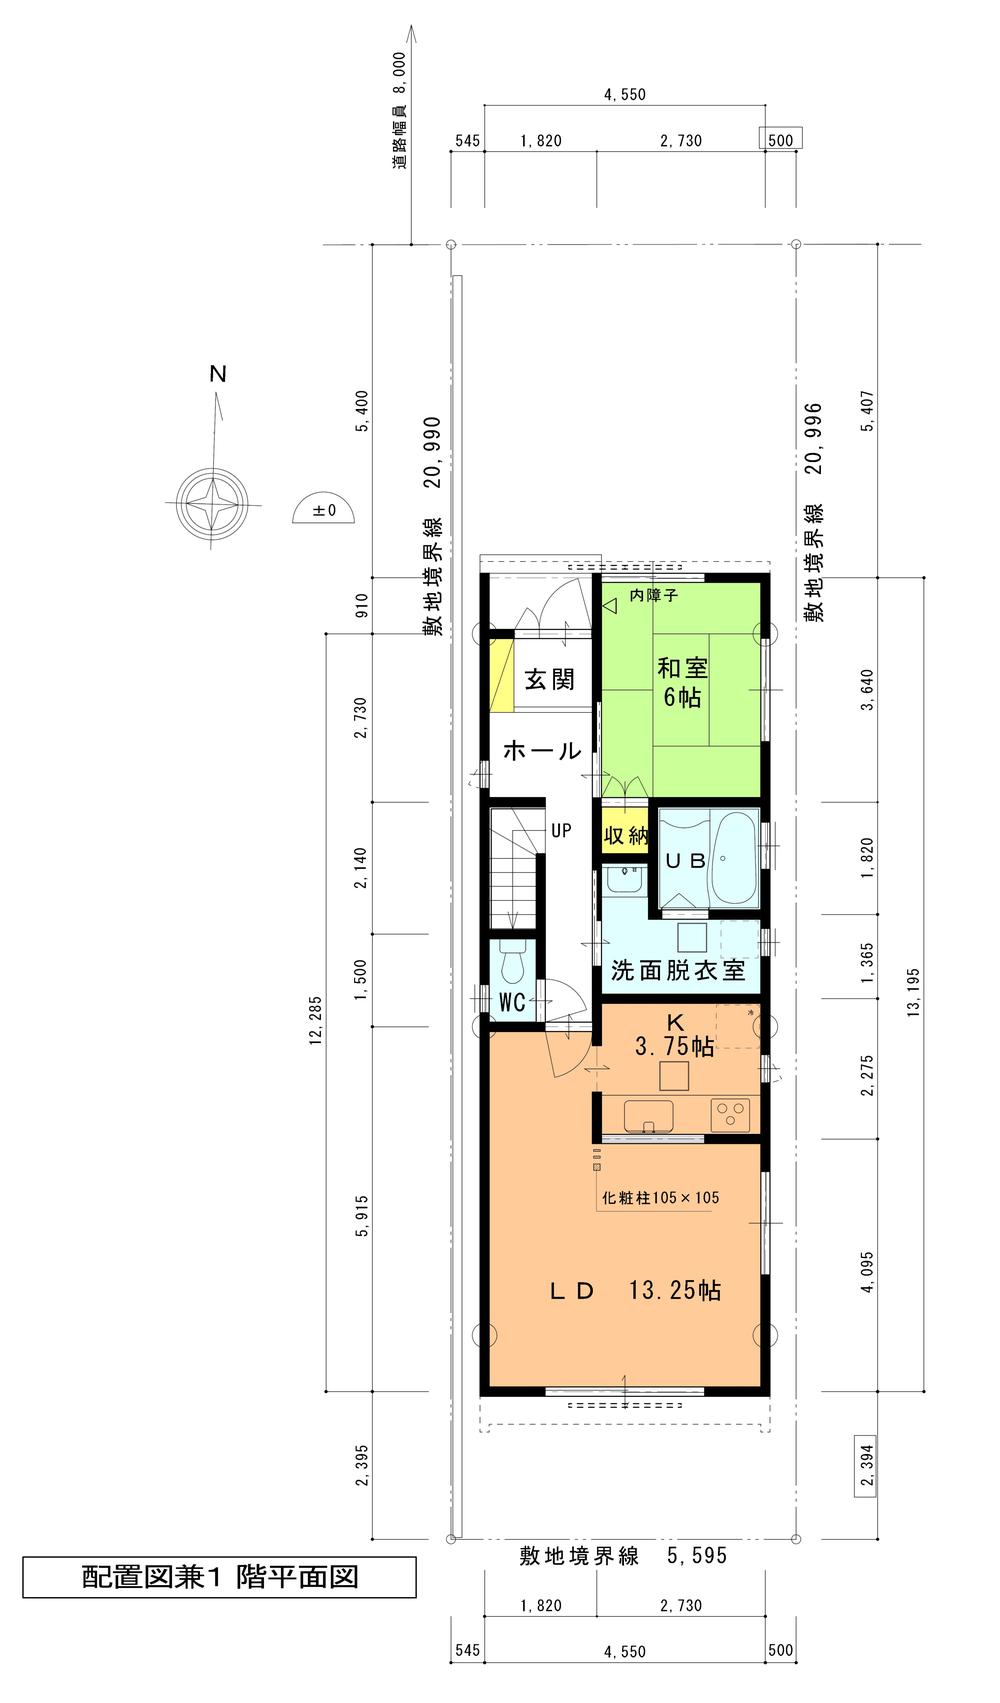 Floor plan. 24,800,000 yen, 4LDK, Land area 110.14 sq m , Building area 117.46 sq m   [1-floor plan view] Two possible parking. Spacious living room. There is also a separate Japanese-style room. 